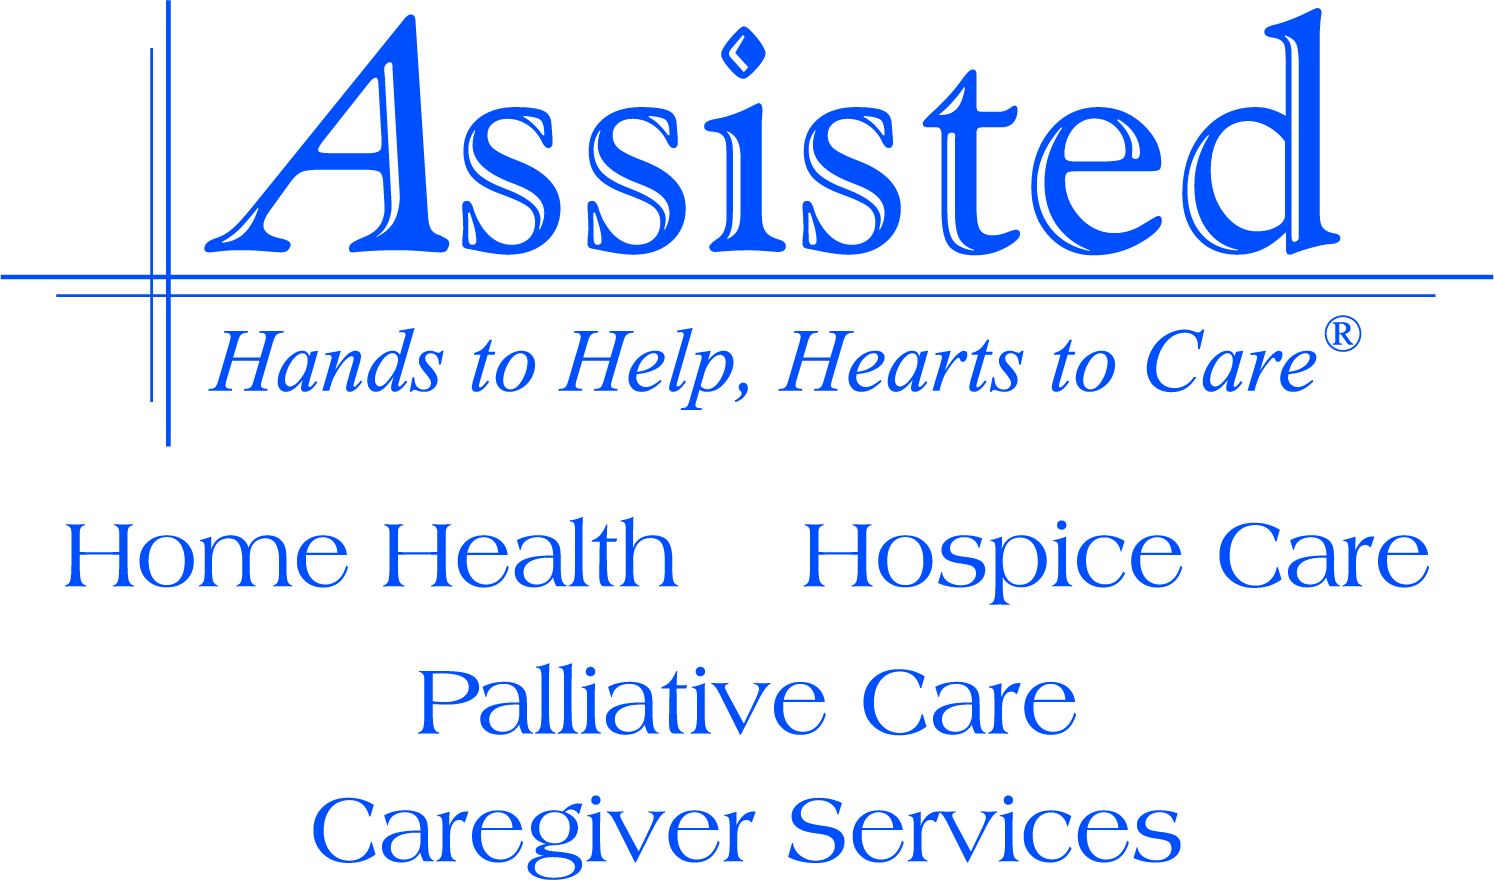 3. Assisted Home Health (Tier 4)